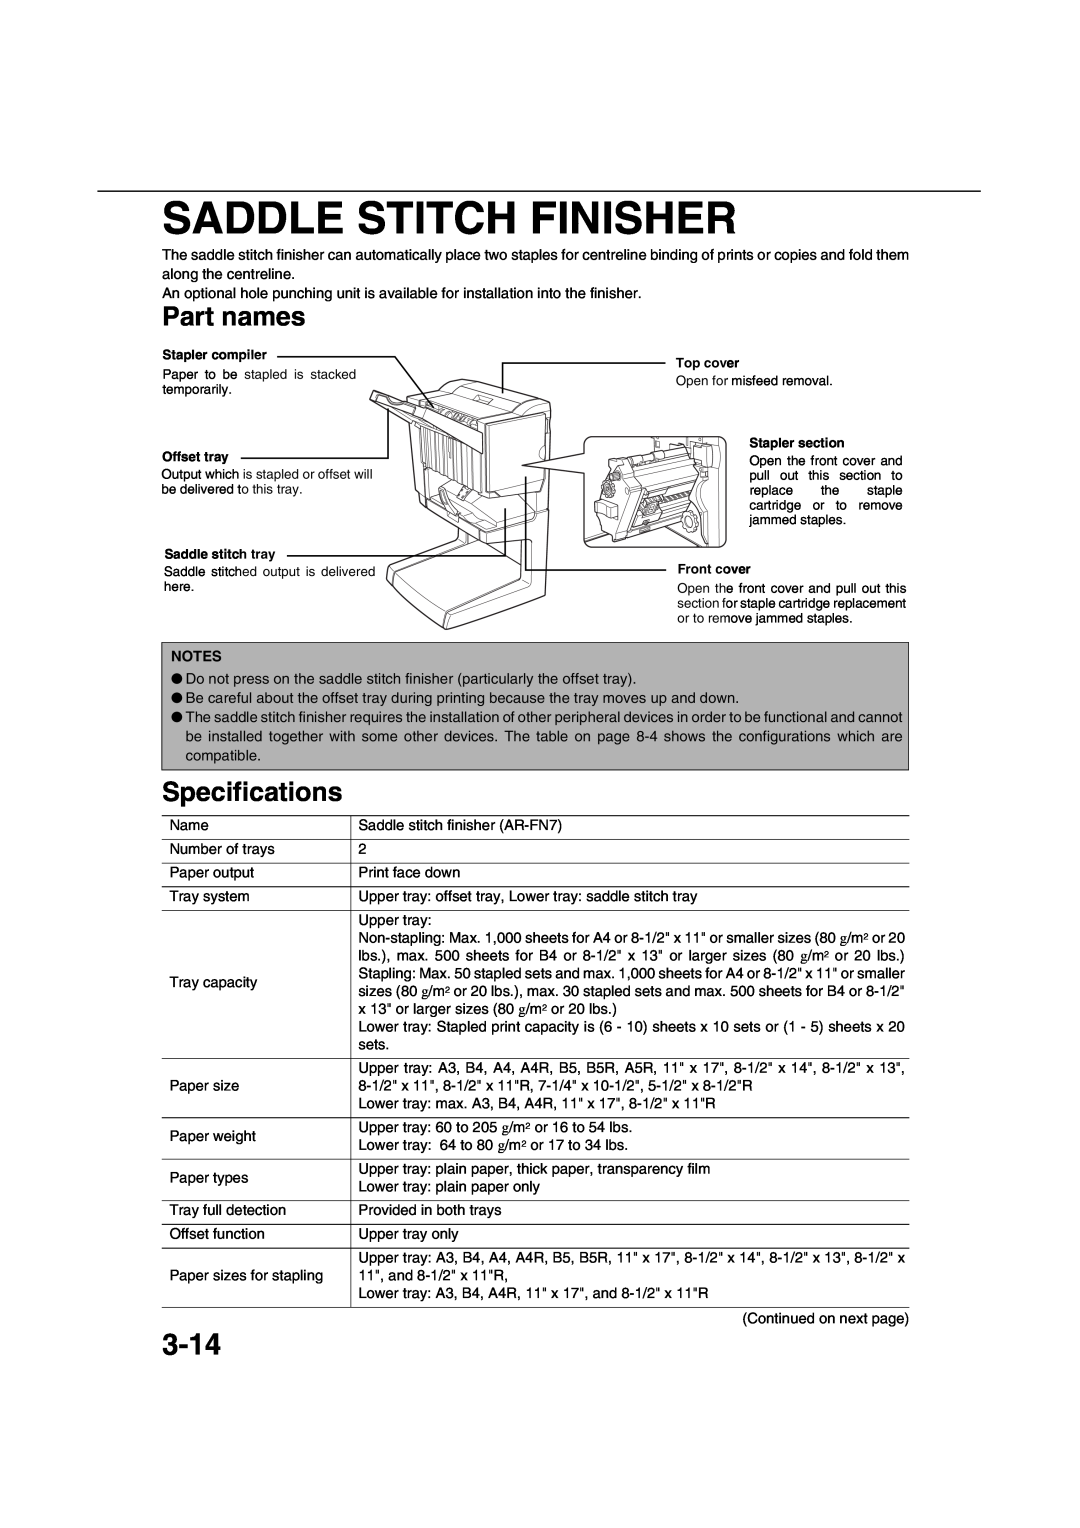 Sharp AR-M451N specifications Saddle Stitch Finisher, 3-14, Part names, Specifications 